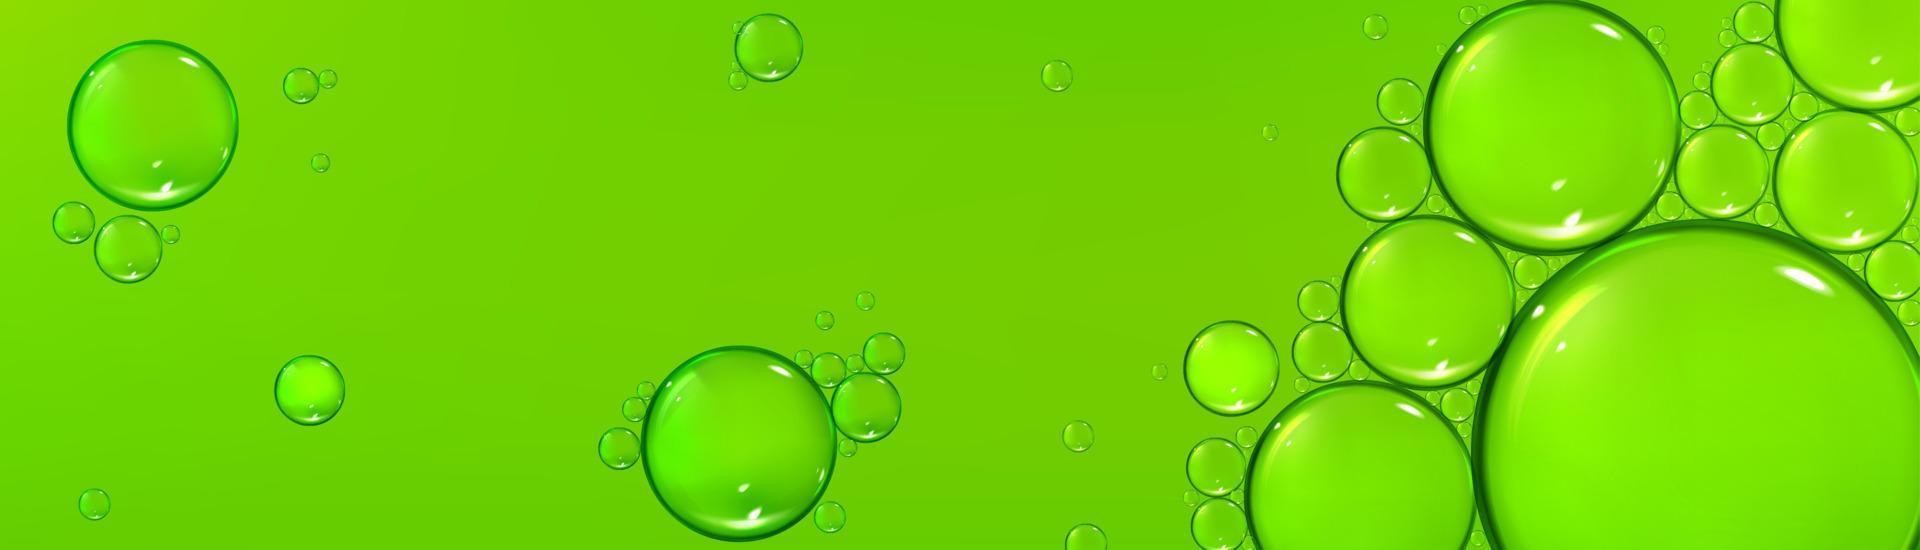 Water drops on green background, rain droplets vector